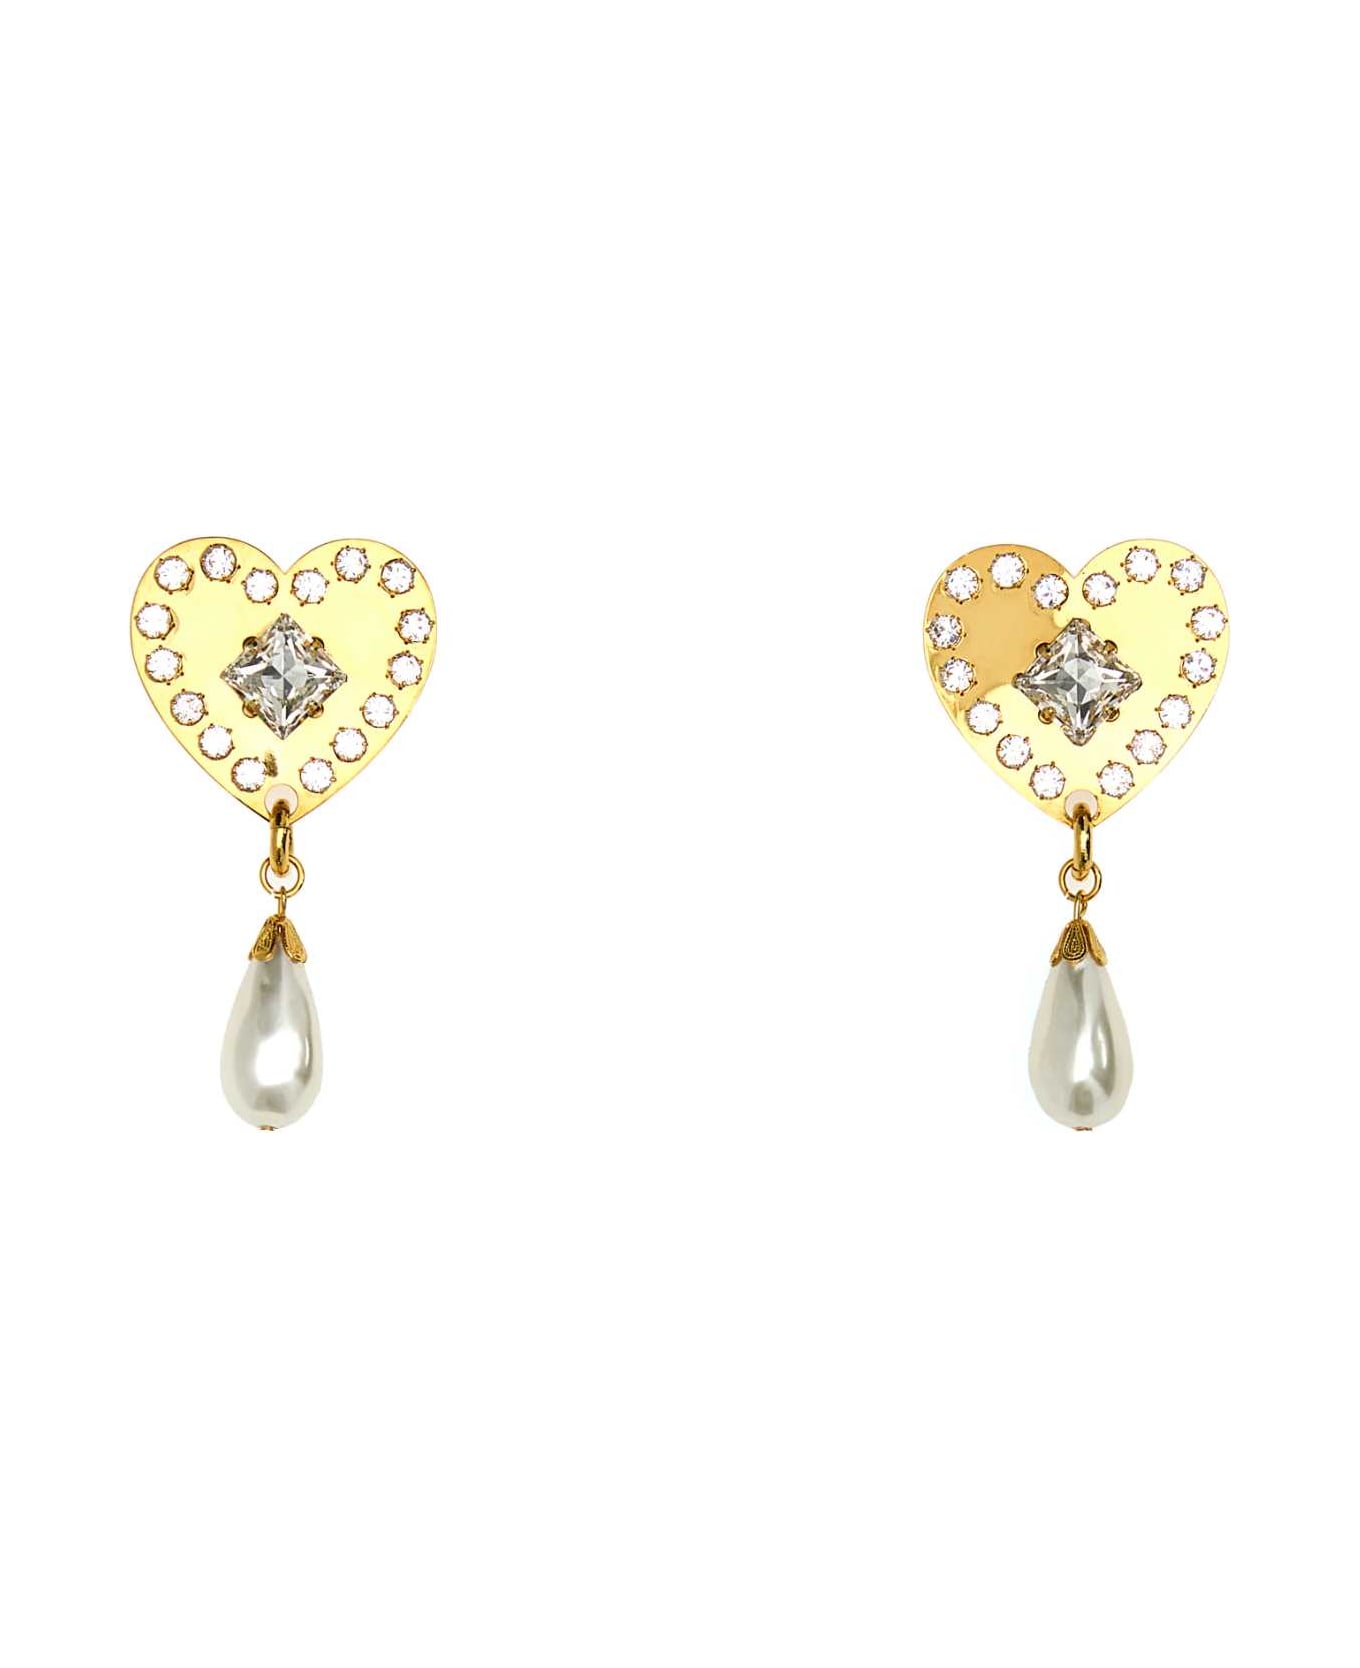 Alessandra Rich Gold Metal Earrings - CRYGOLD